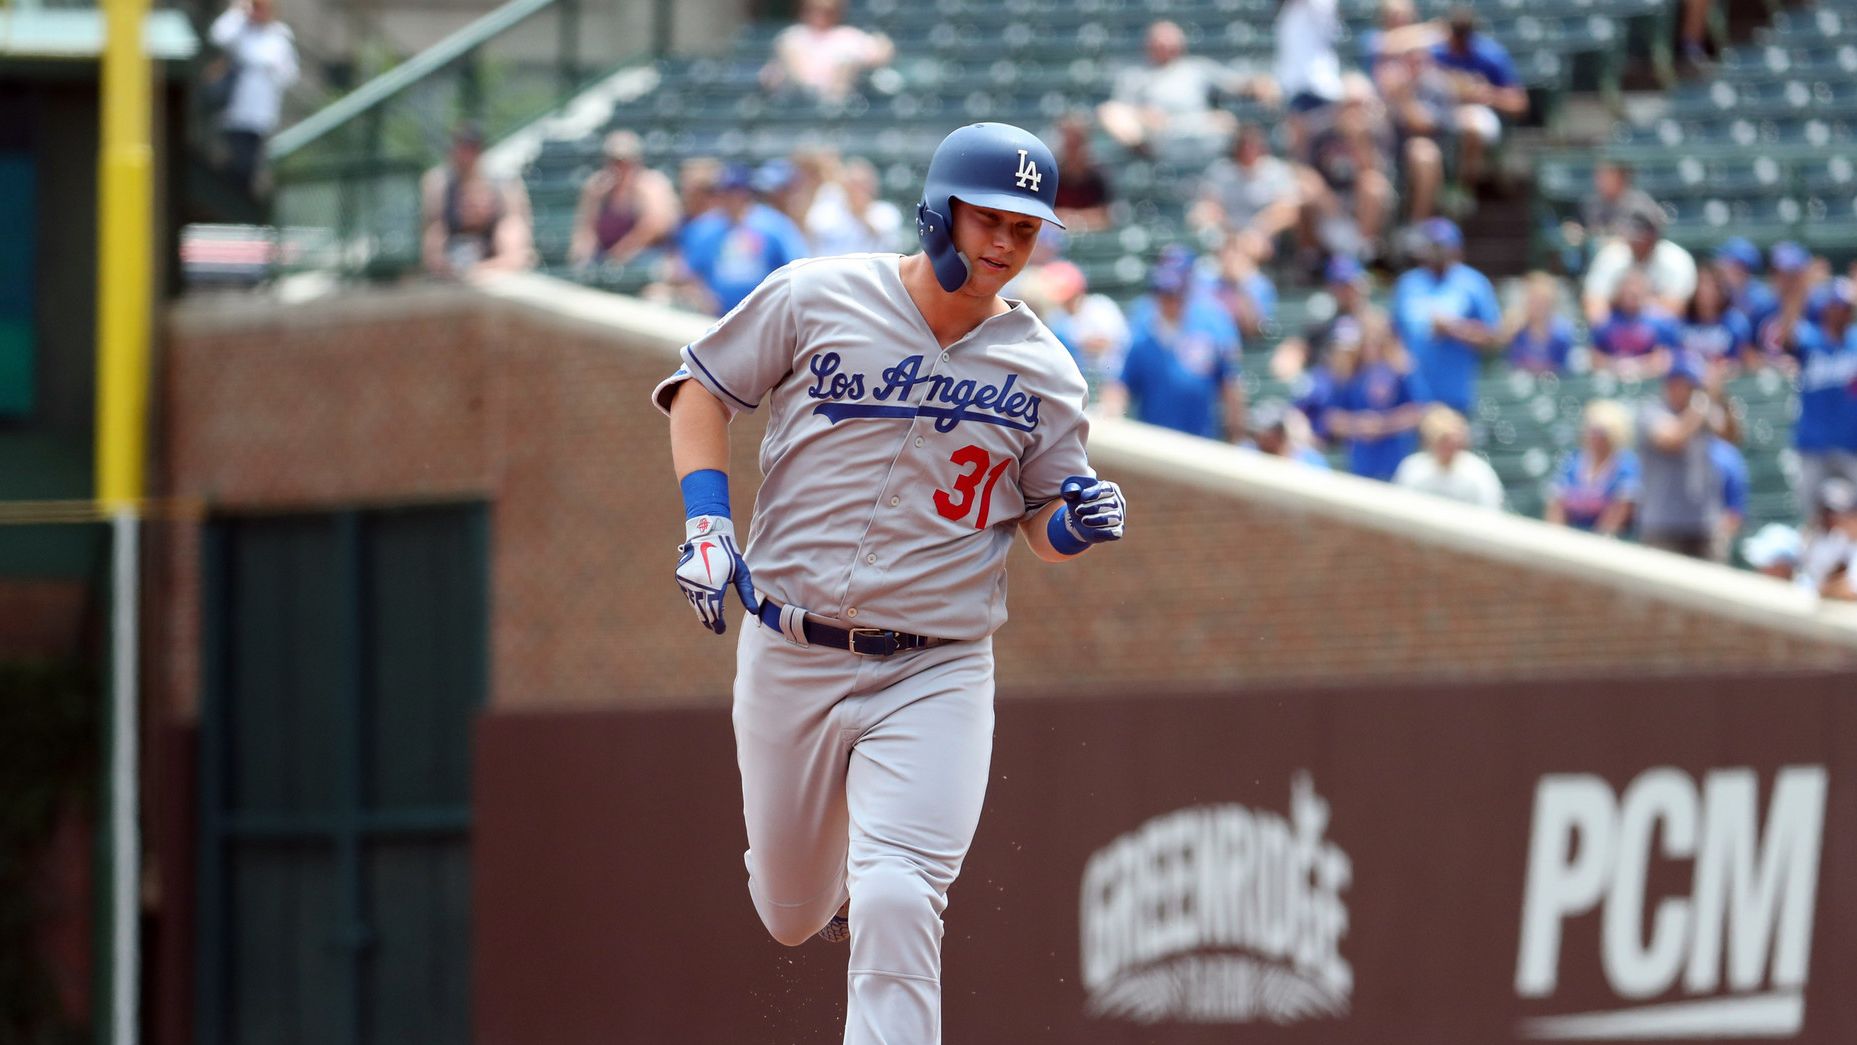 Dodgers' Joc Pederson Hits Homers That Travel, but He Has a Long Way to Go  - The New York Times